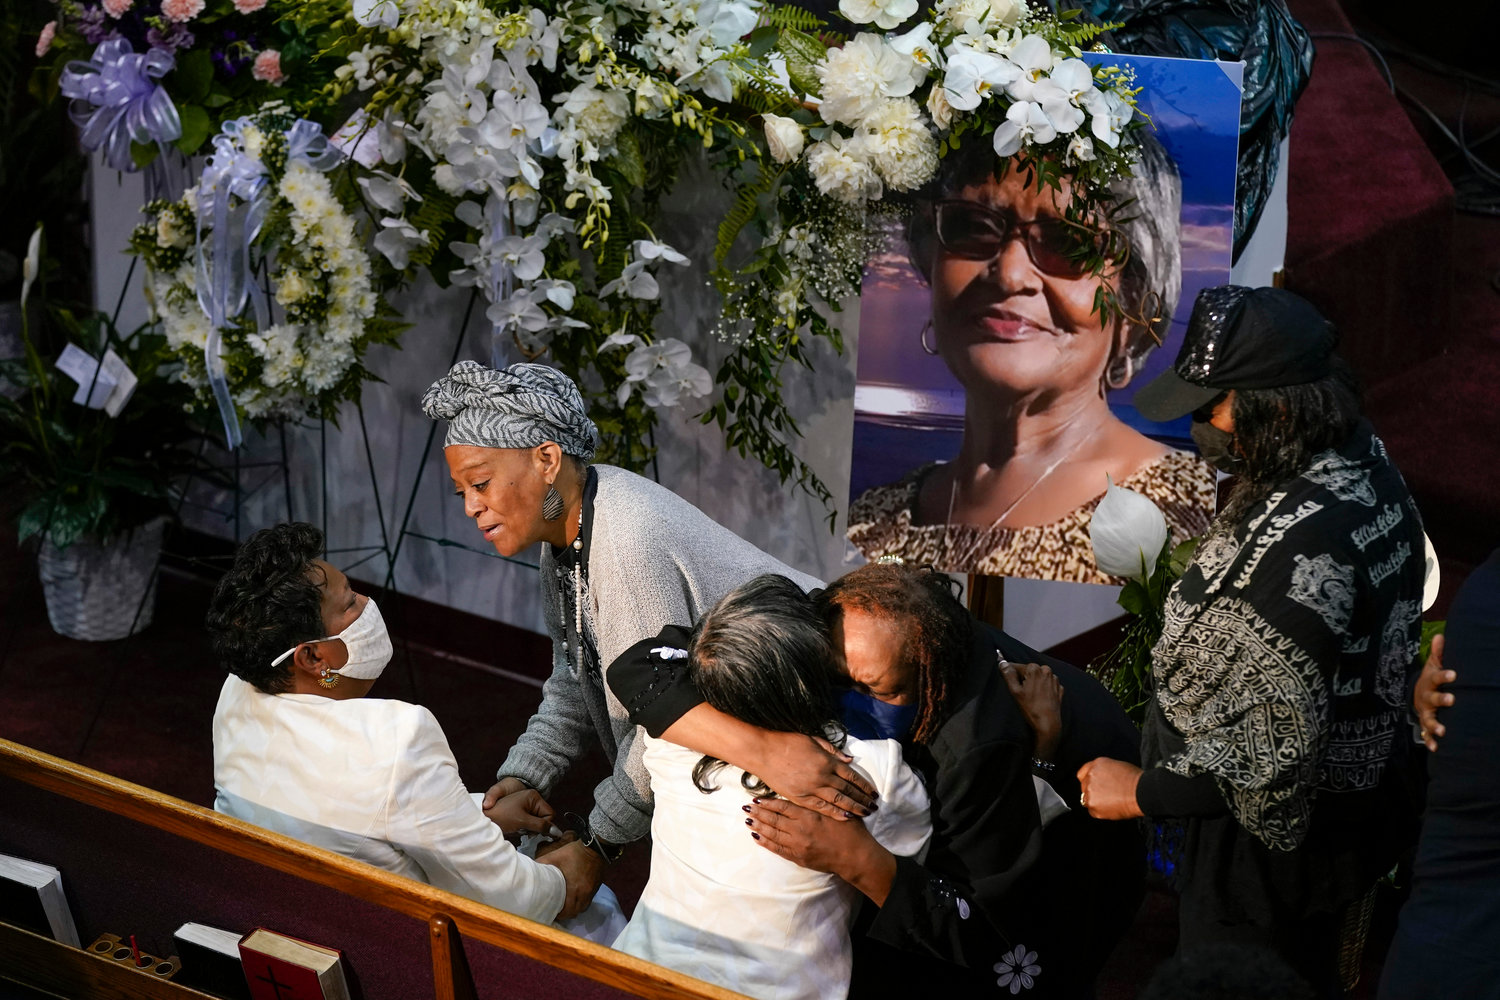 Mourners comfort Angela Crawley, seated at bottom left, and Robin Harris, daughters of Ruth Whitfield, a victim of the Buffalo supermarket shooting, before a memorial service at Mt. Olive Baptist Church with Vice President Kamala Harris in attendance, Saturday, May 28, 2022, in Buffalo, N.Y.